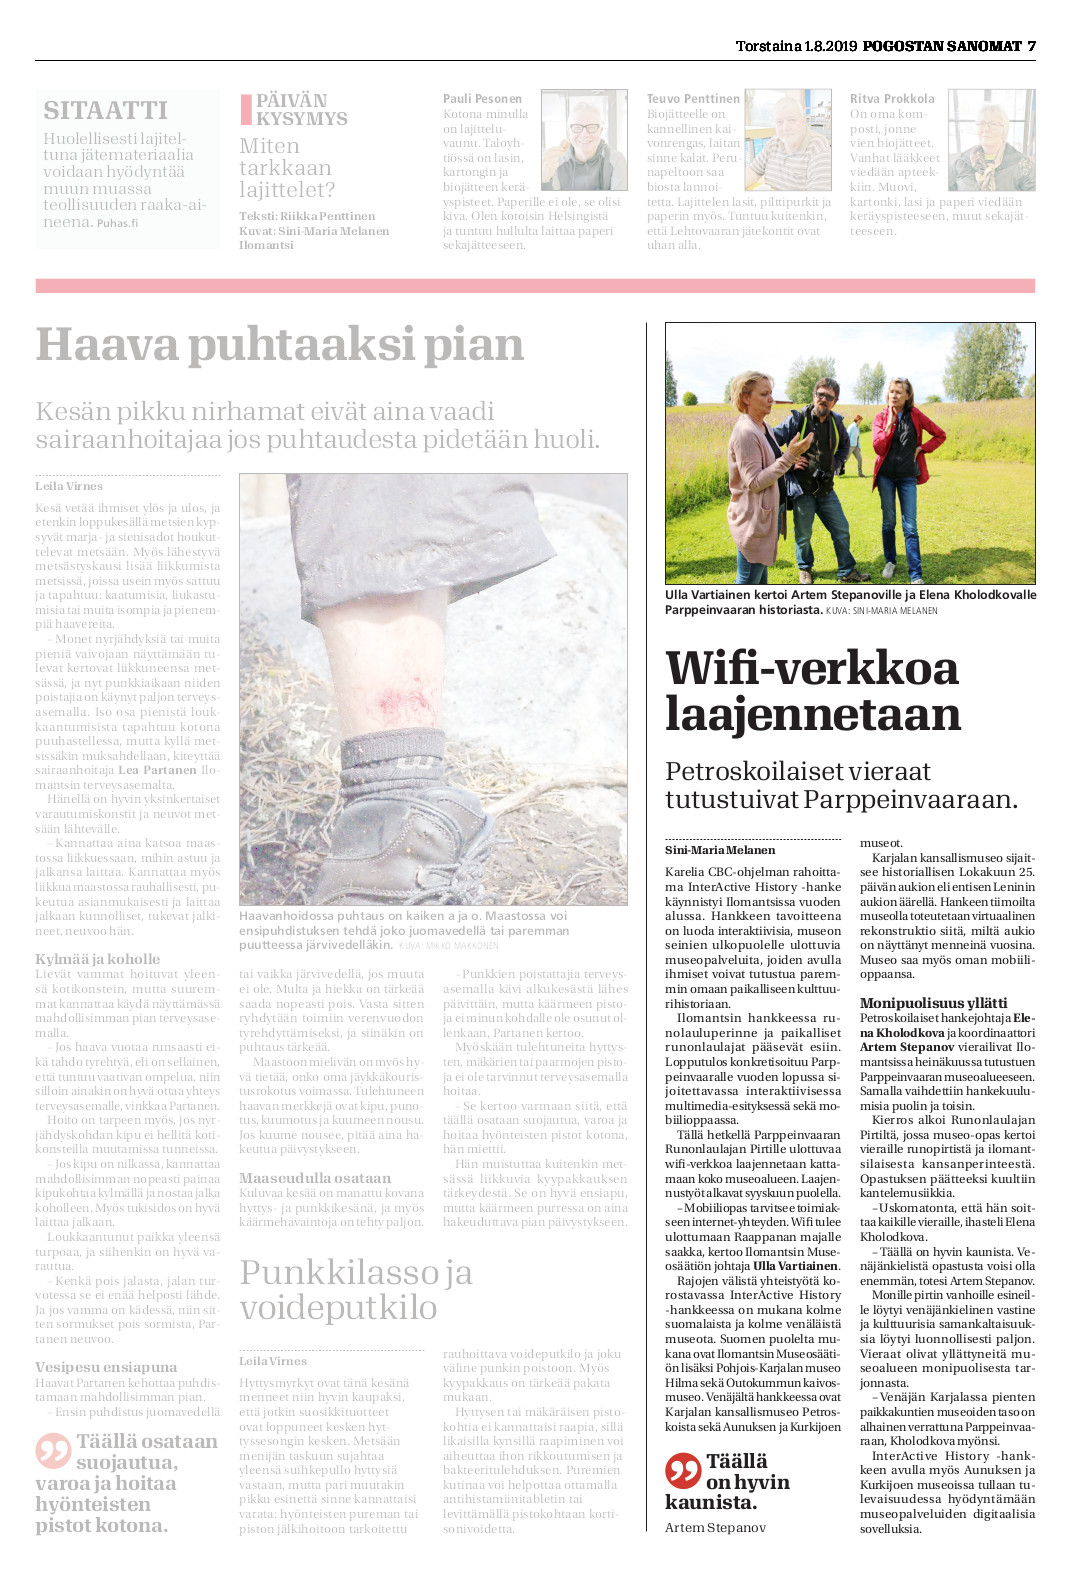 New article about the InterActive History project in Pogostan Sanomat newspaper